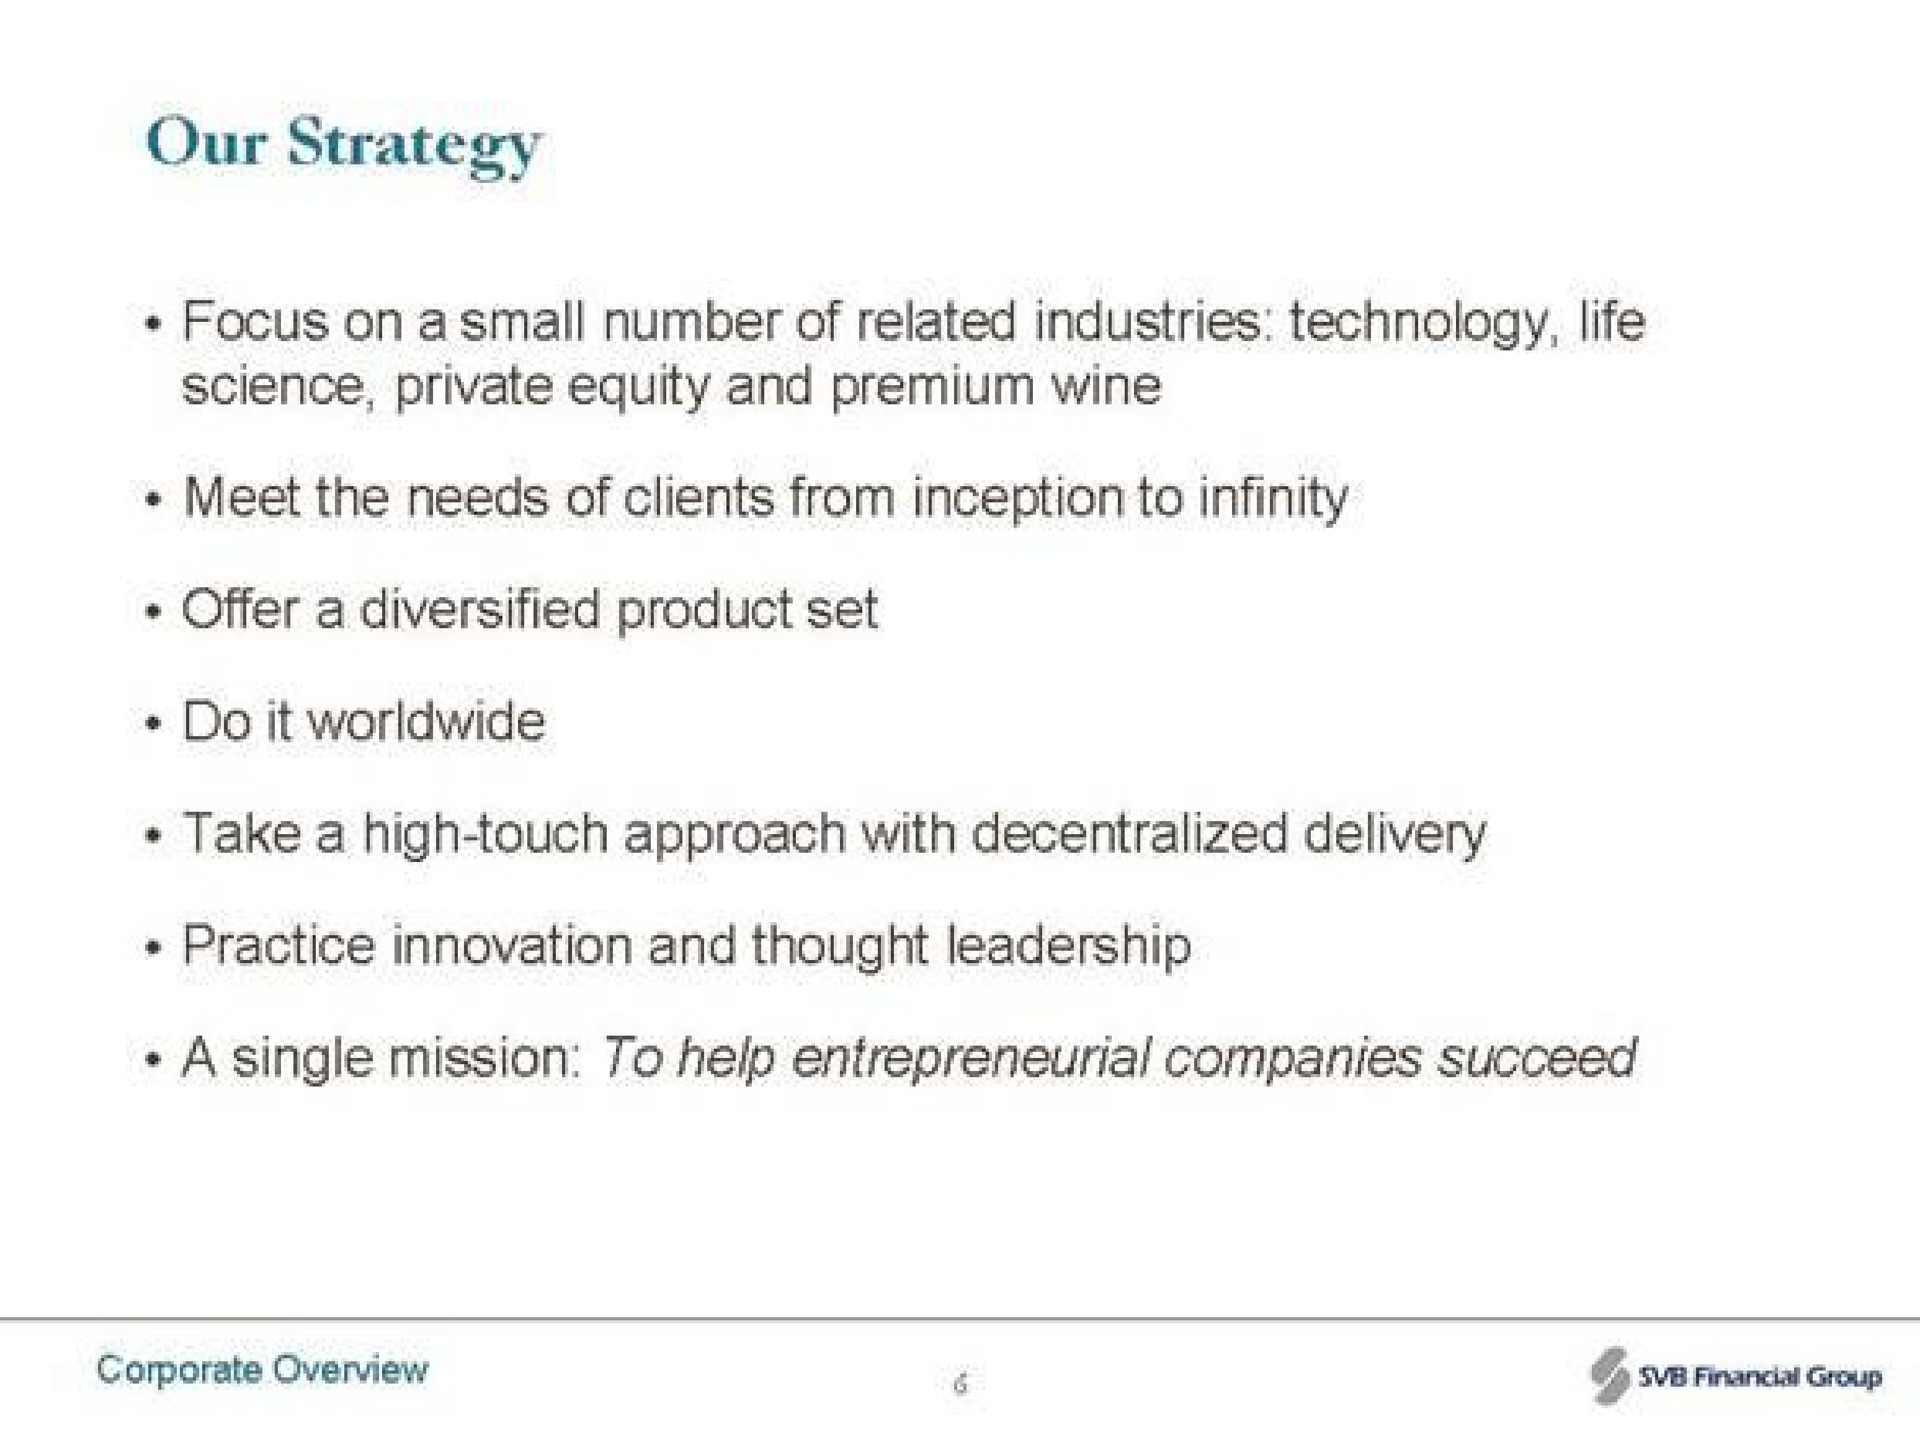 our strategy do it practice innovation and thought leadership a single mission to help entrepreneurial companies succeed | Silicon Valley Bank